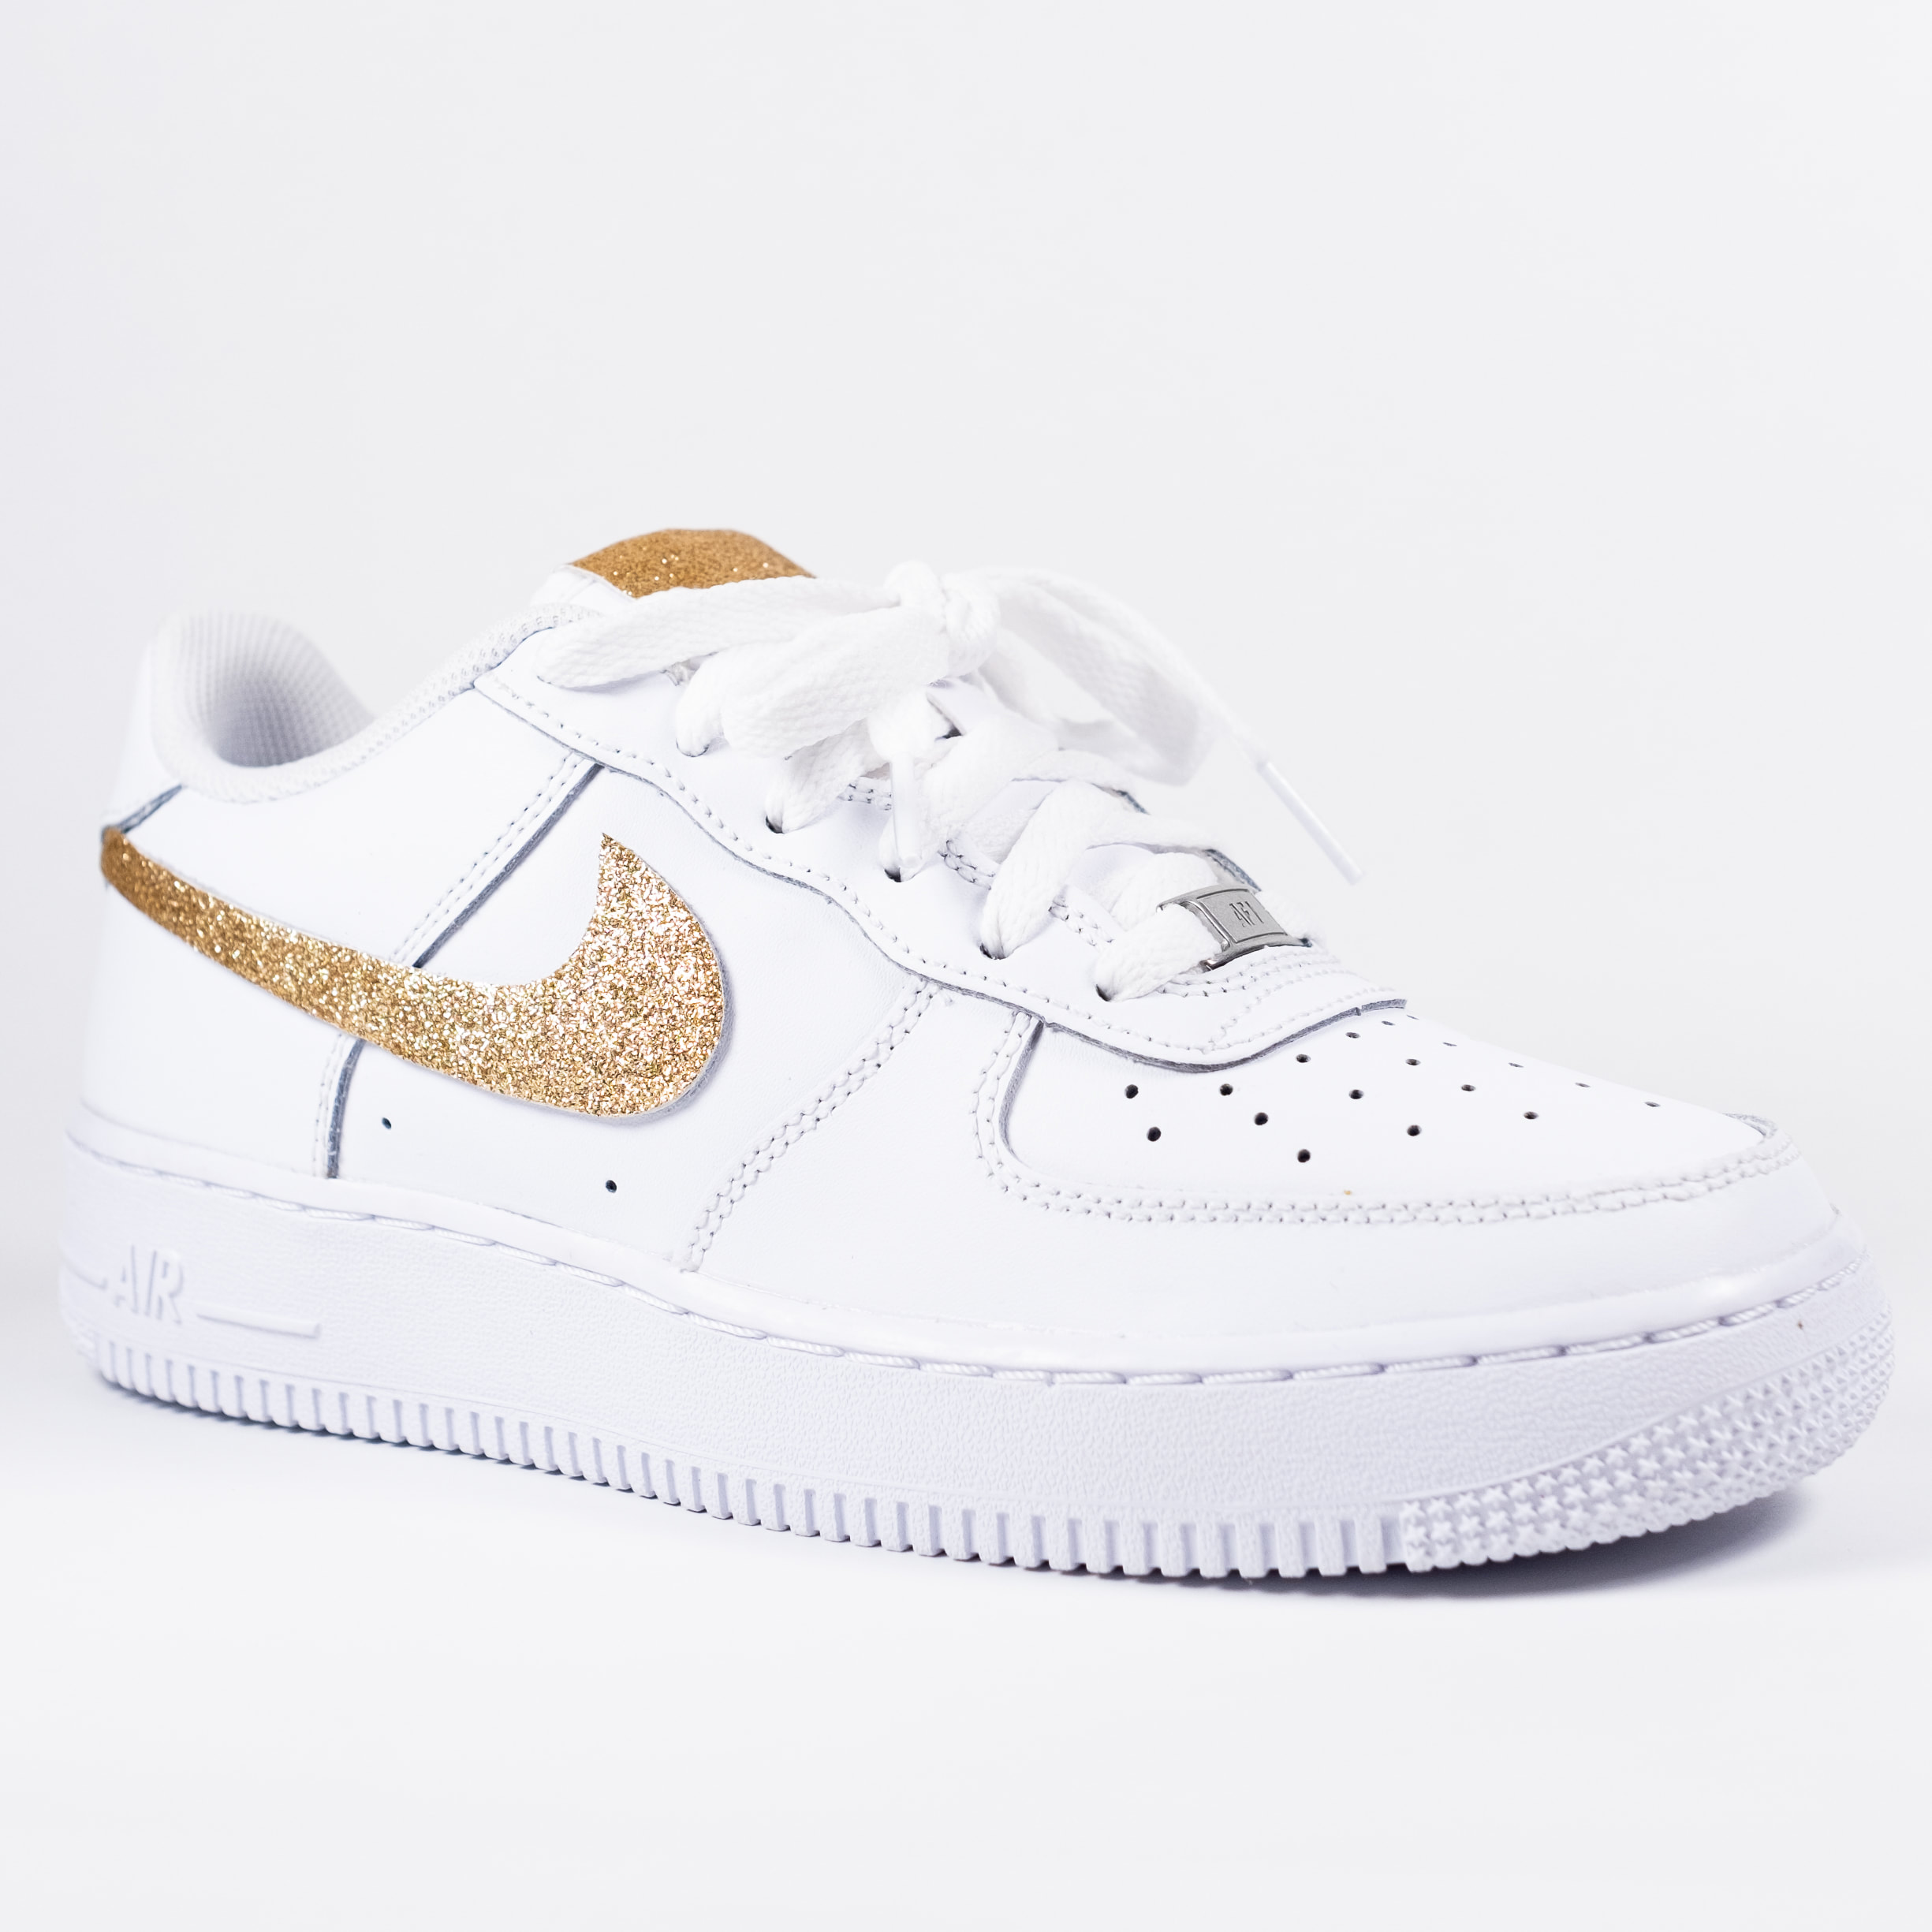 The Nike Air Force 1 High Metallic Gold Is Dressed To Impress